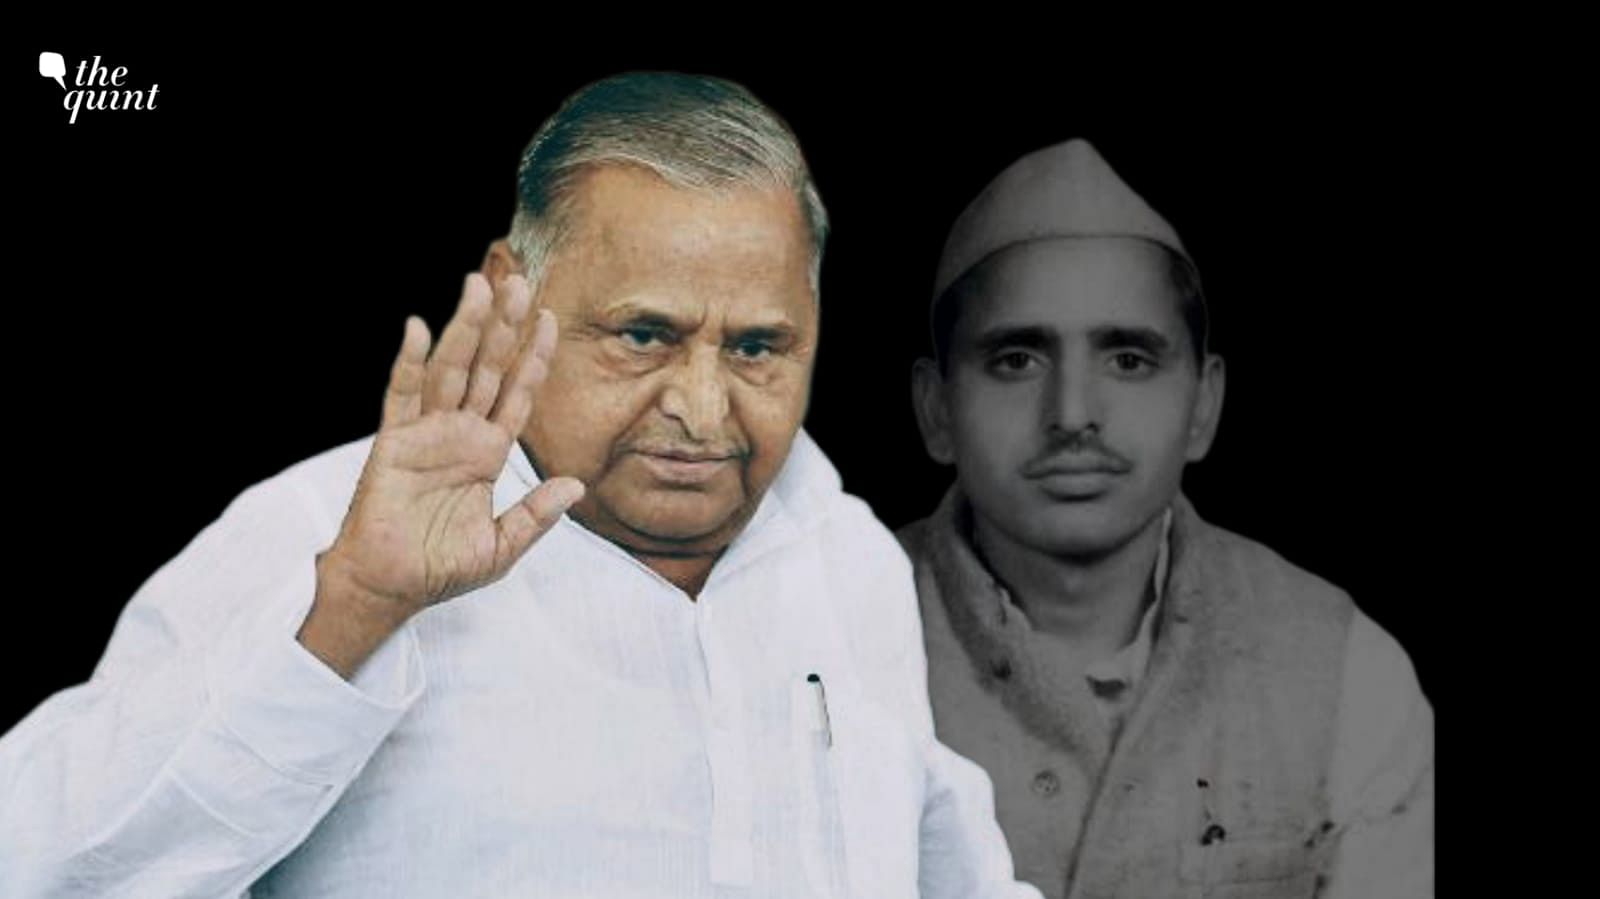 <div class="paragraphs"><p>Former Chief Minister of Uttar Pradesh and Samajwadi Party (SP) supremo Mulayam Singh Yadav passed away on October 10 at the age of 82. He was popularly known as ‘Netaji’ in his political circles.</p></div>